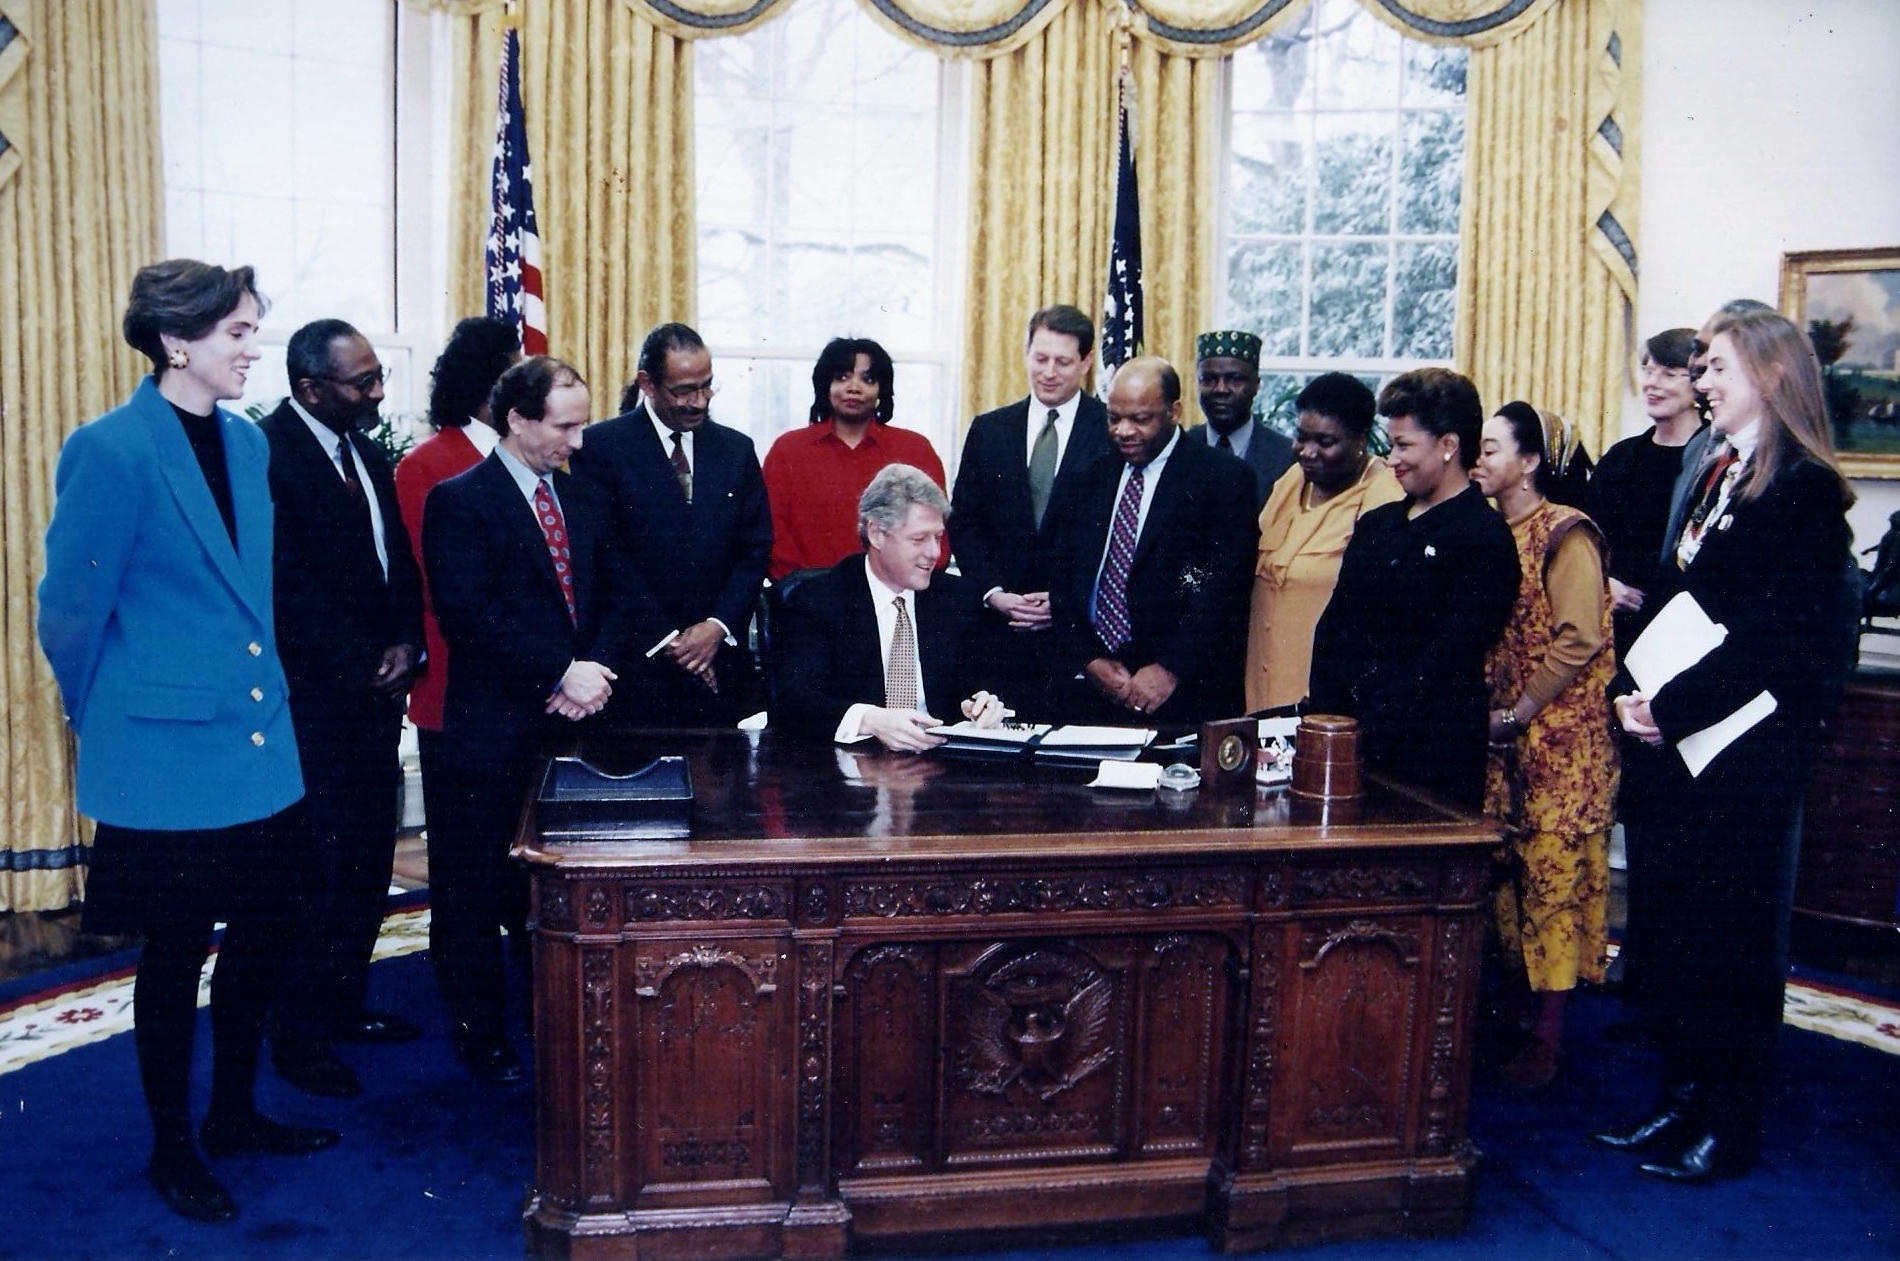 Hazel Johnson, fifth from right, joins other environmental activists Feb. 16, 1994, in the Oval Office of the White House as President Bill Clinton signs Executive Order 12898, which directed the EPA and federal government to identify at-risk communities 